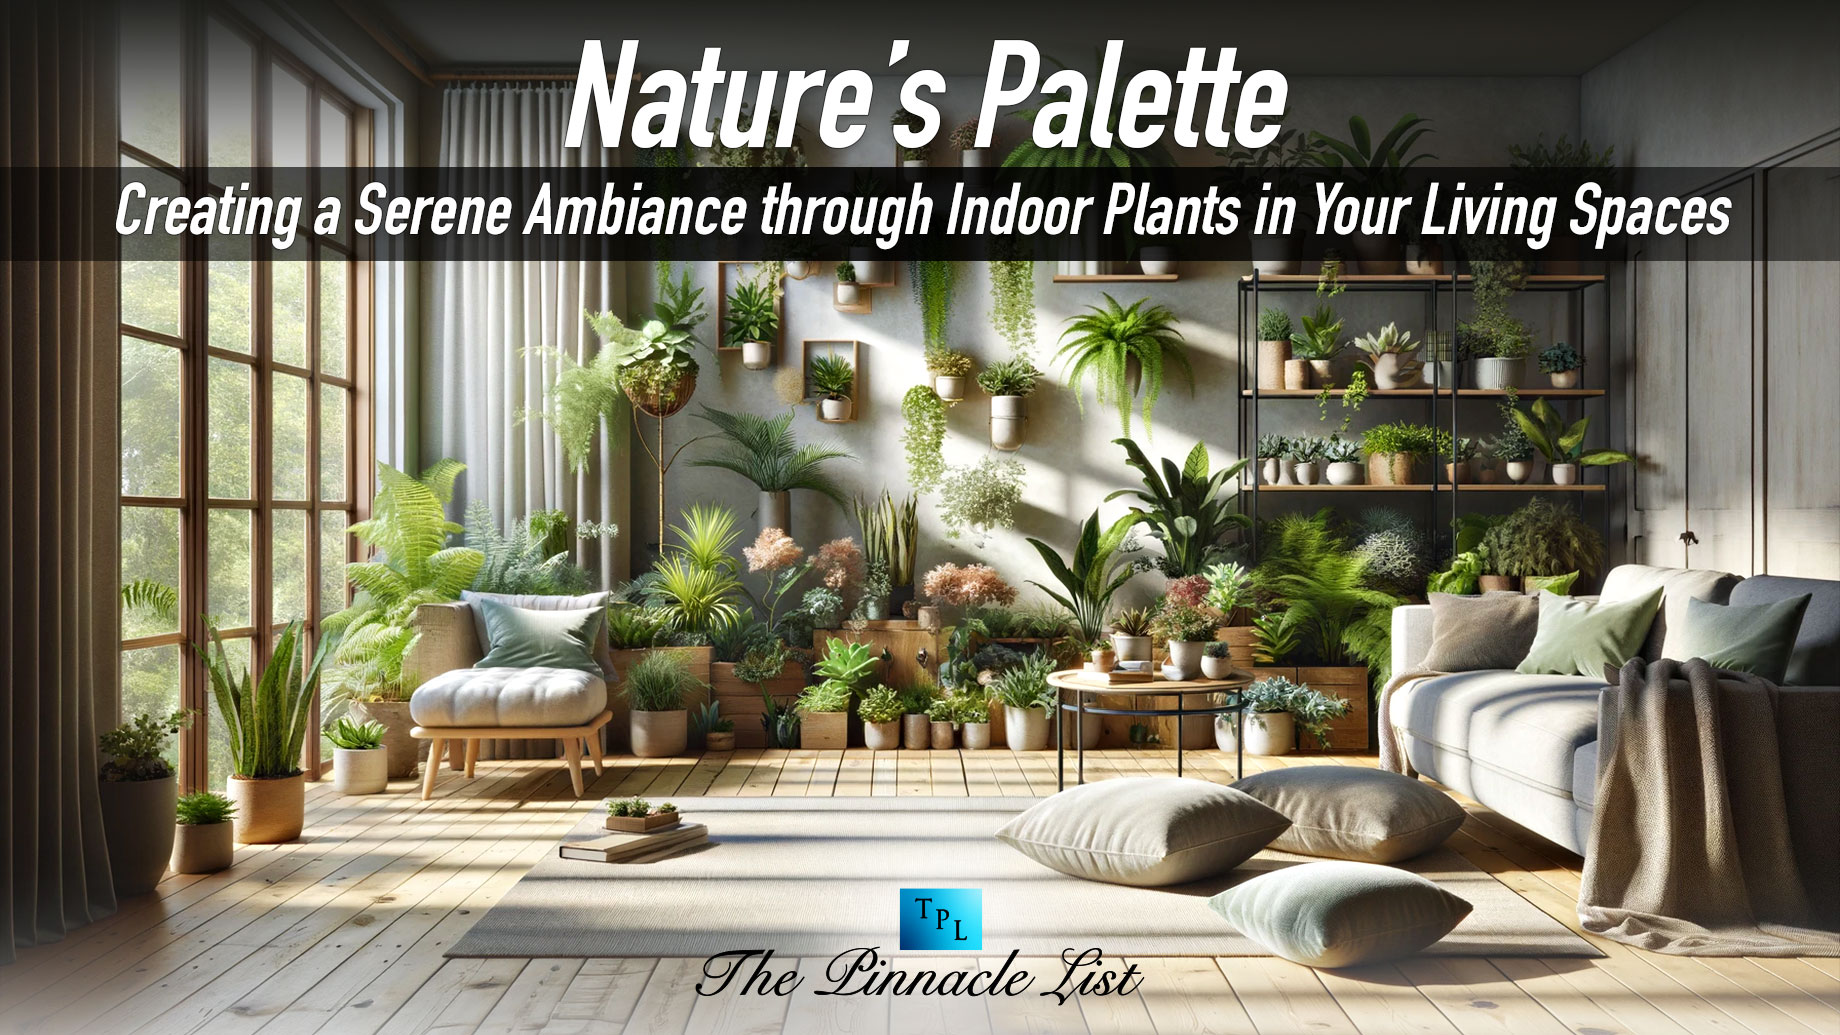 Nature’s Palette: Creating a Serene Ambiance through Indoor Plants in Your Living Spaces